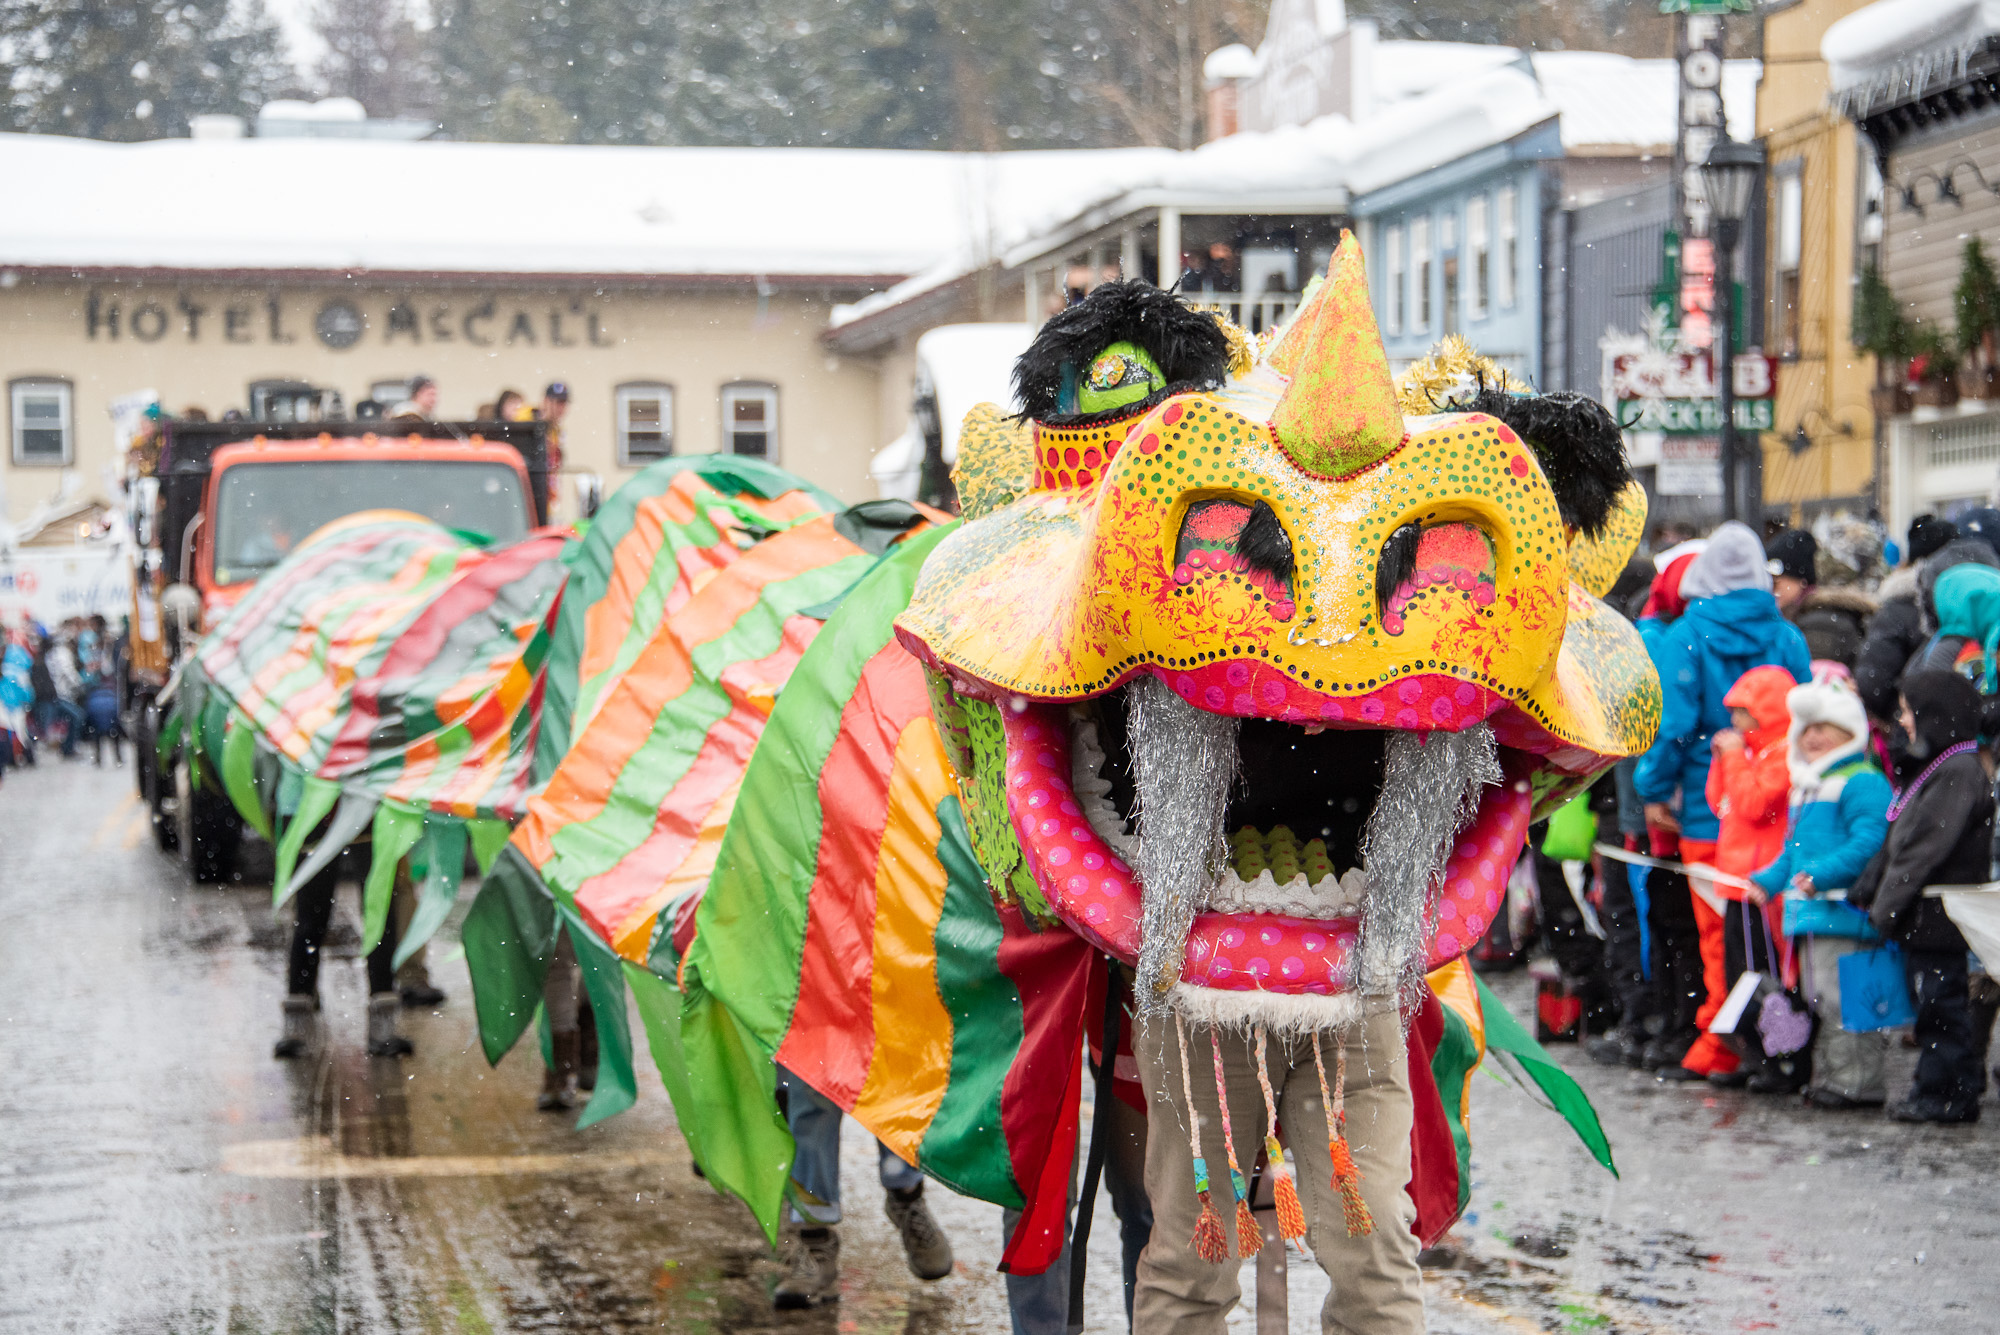 A colorful Chinese dragon dances through a snowy parade.